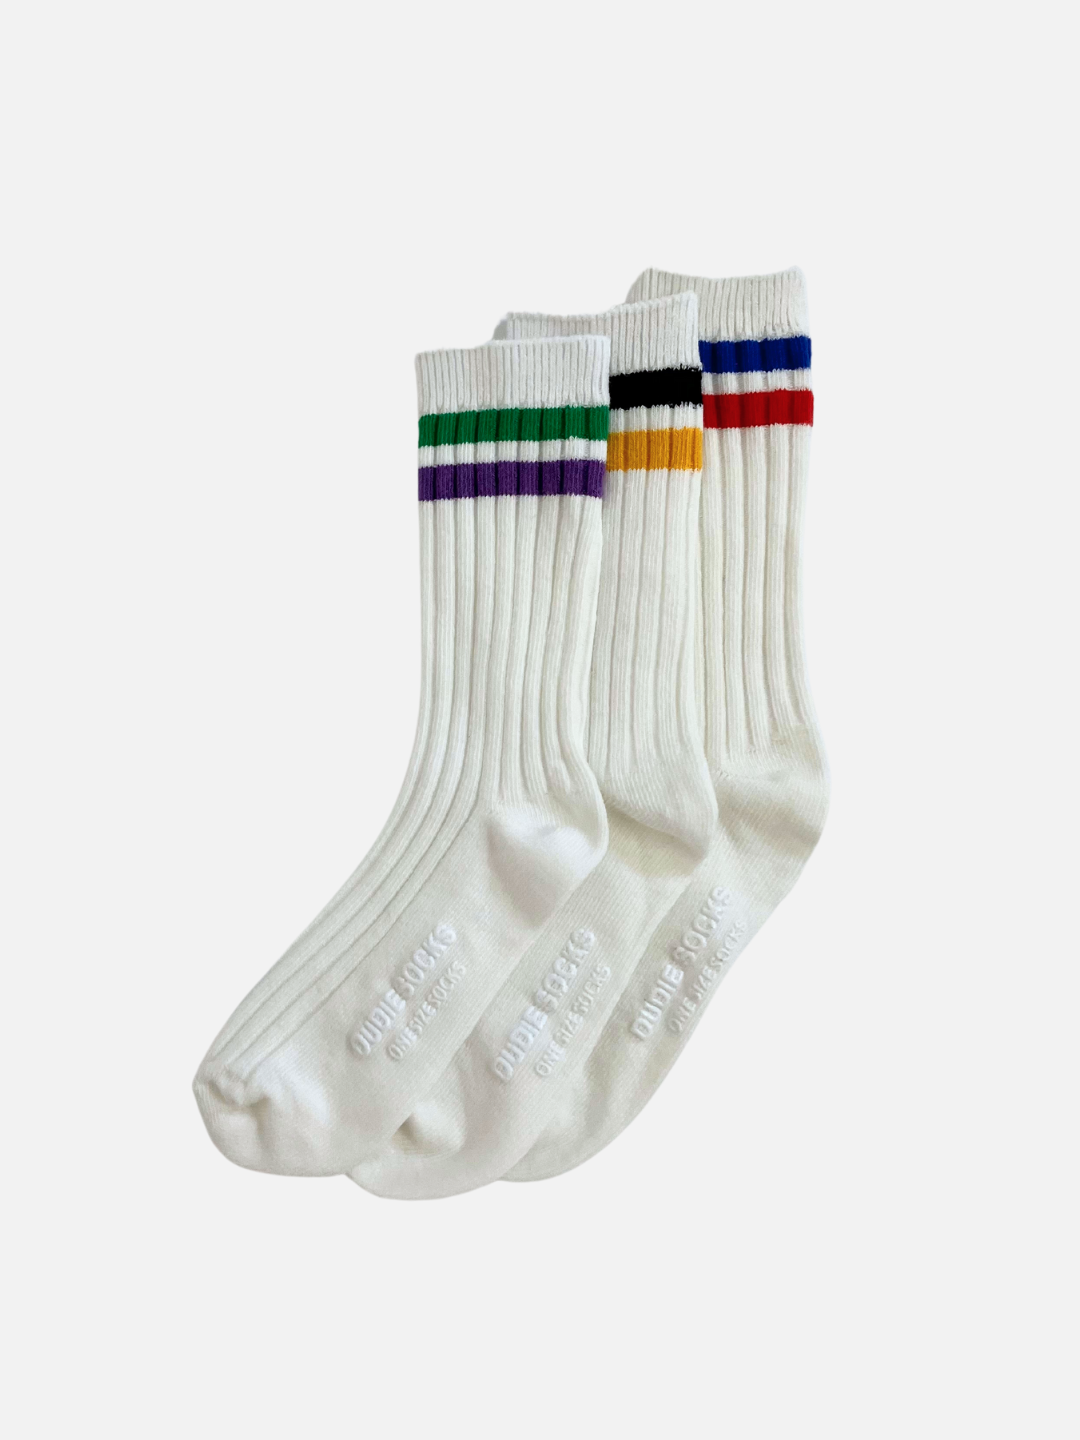 Three white ribbed kids socks with different color stripes at the top, lying in a angled row, overlapping.